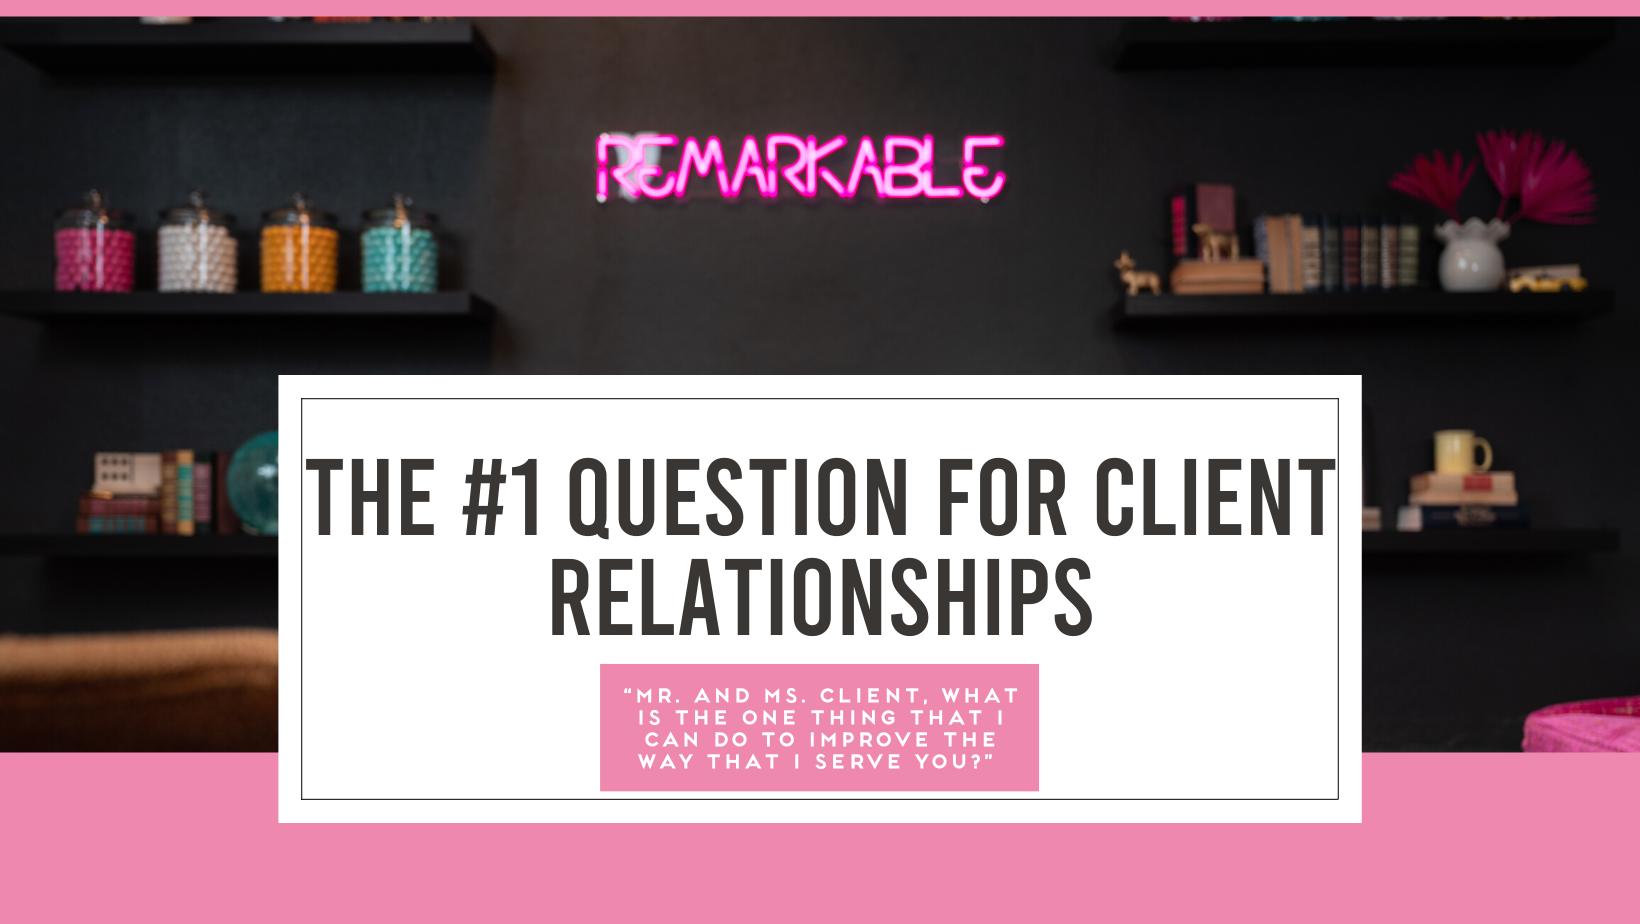 #1 Question for Client Relationships